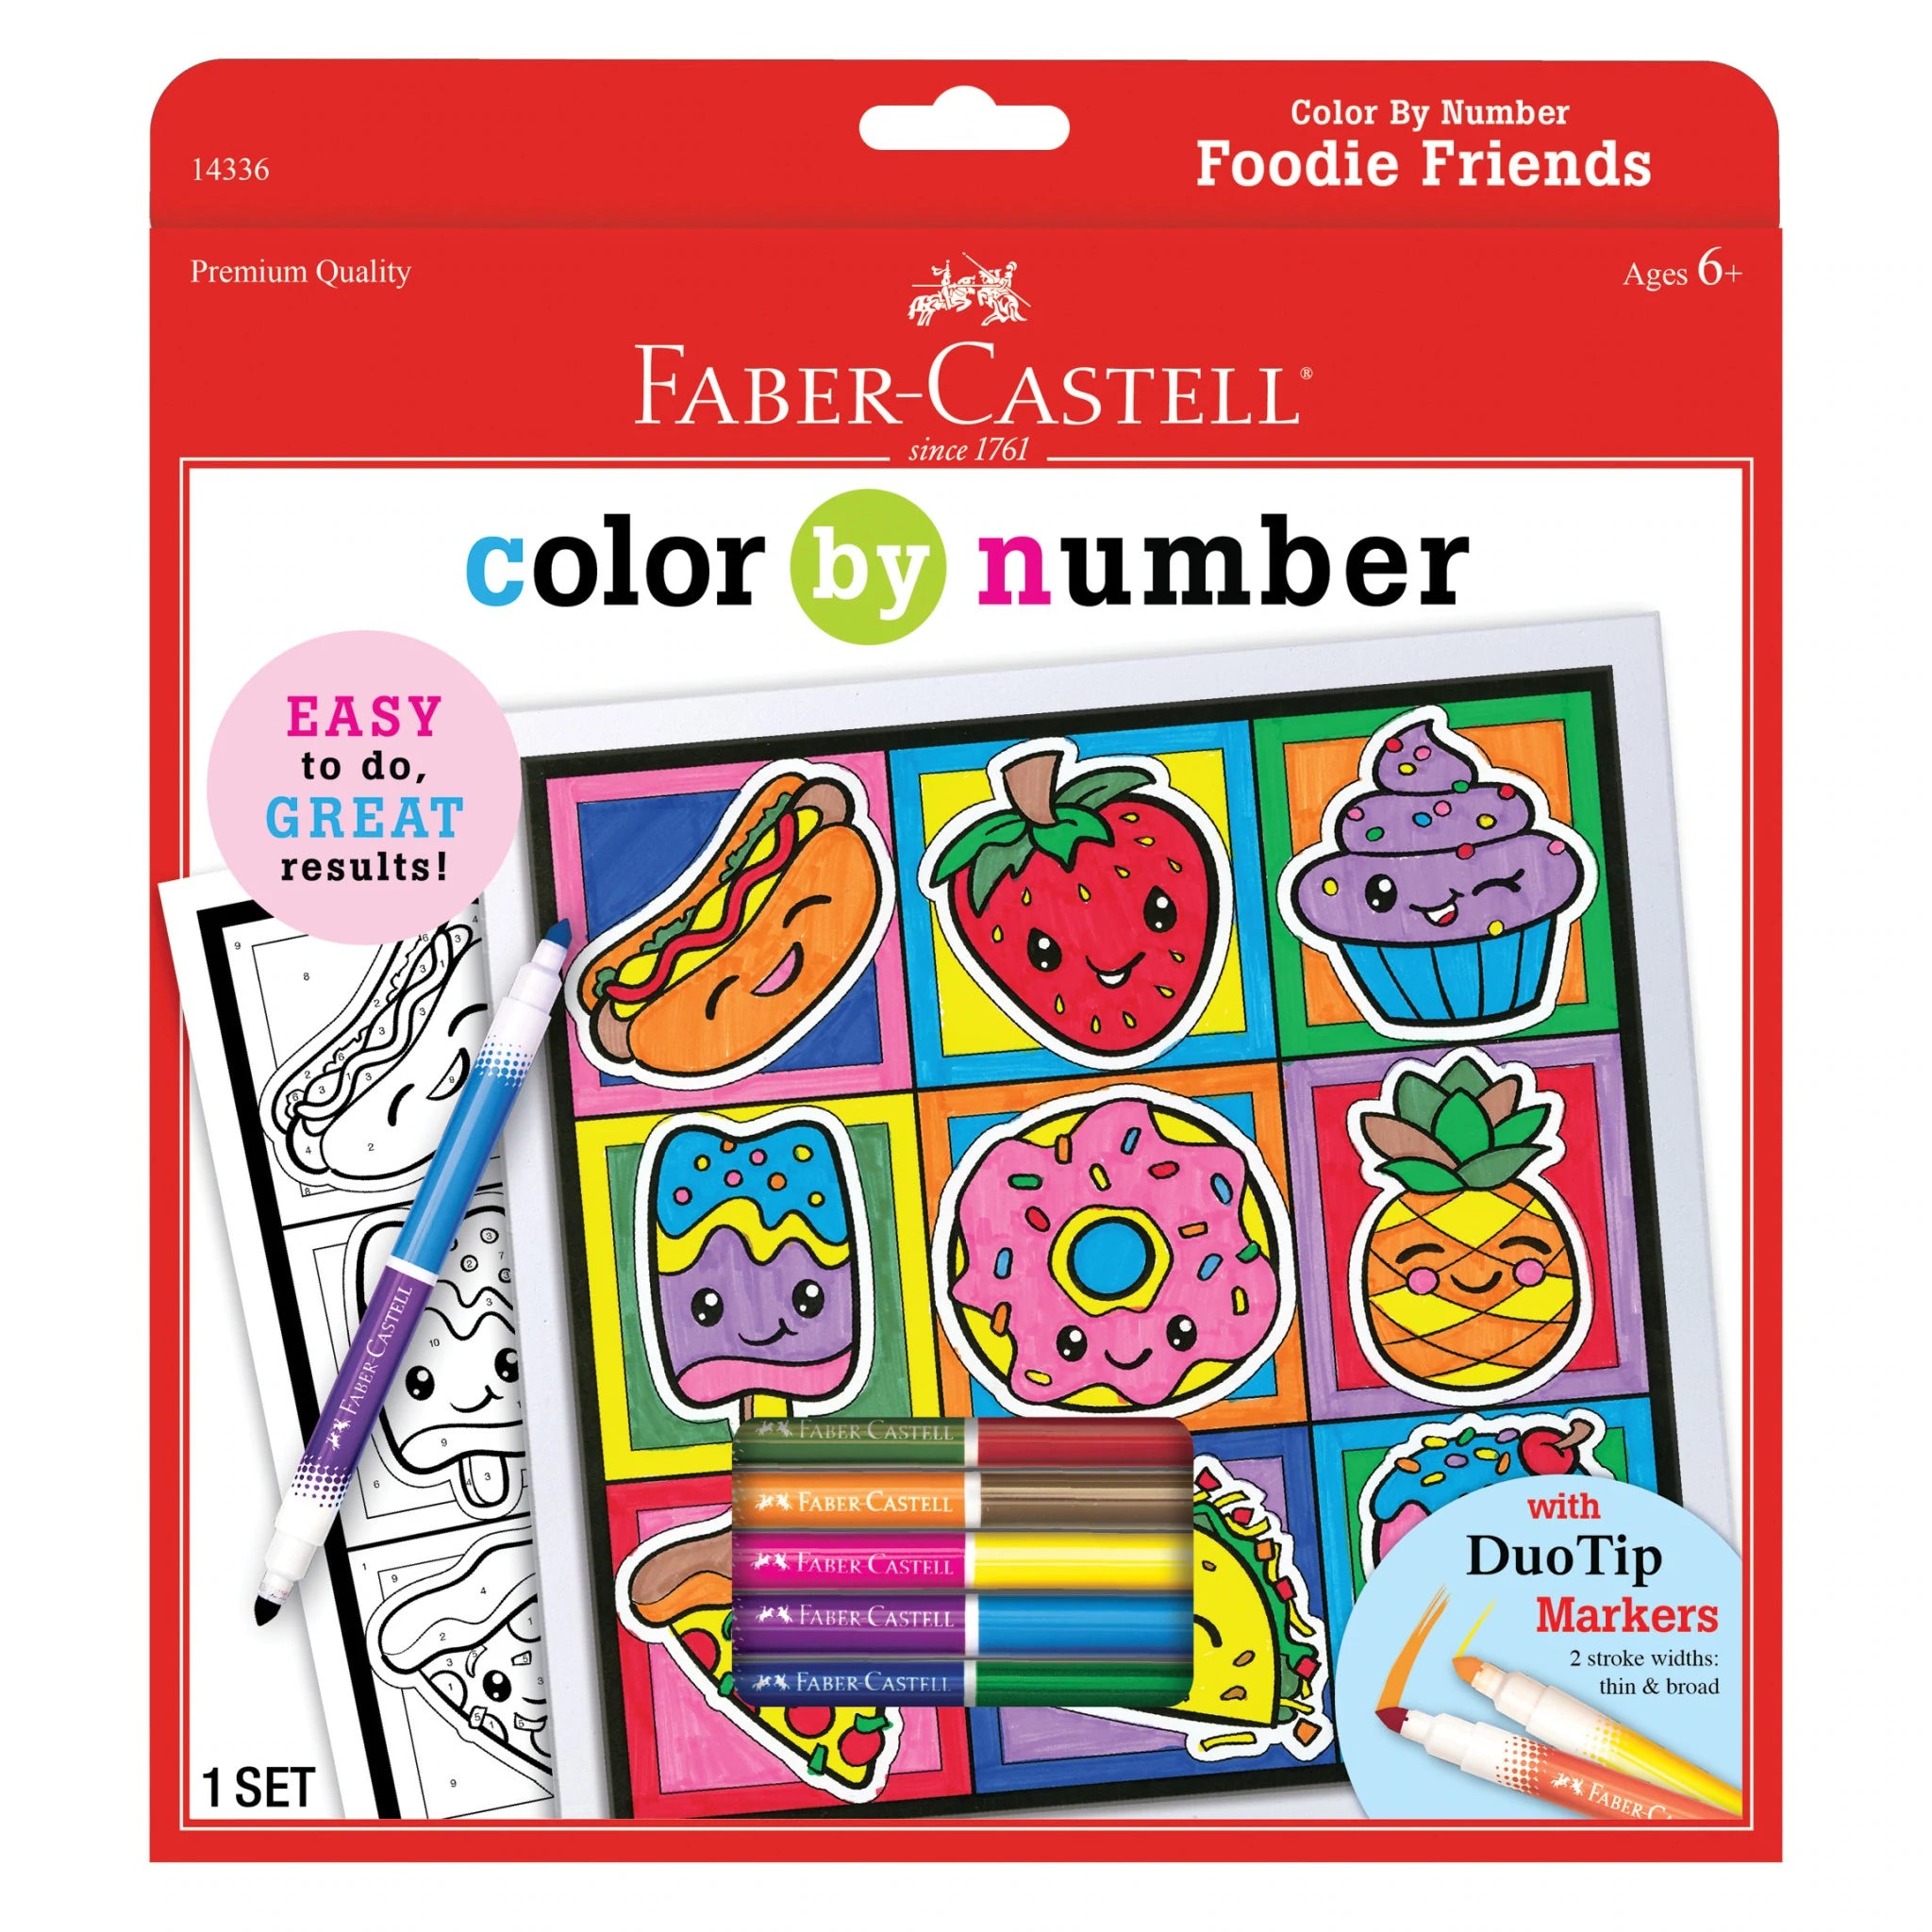 Faber-Castell Color By Number Foodie Friends